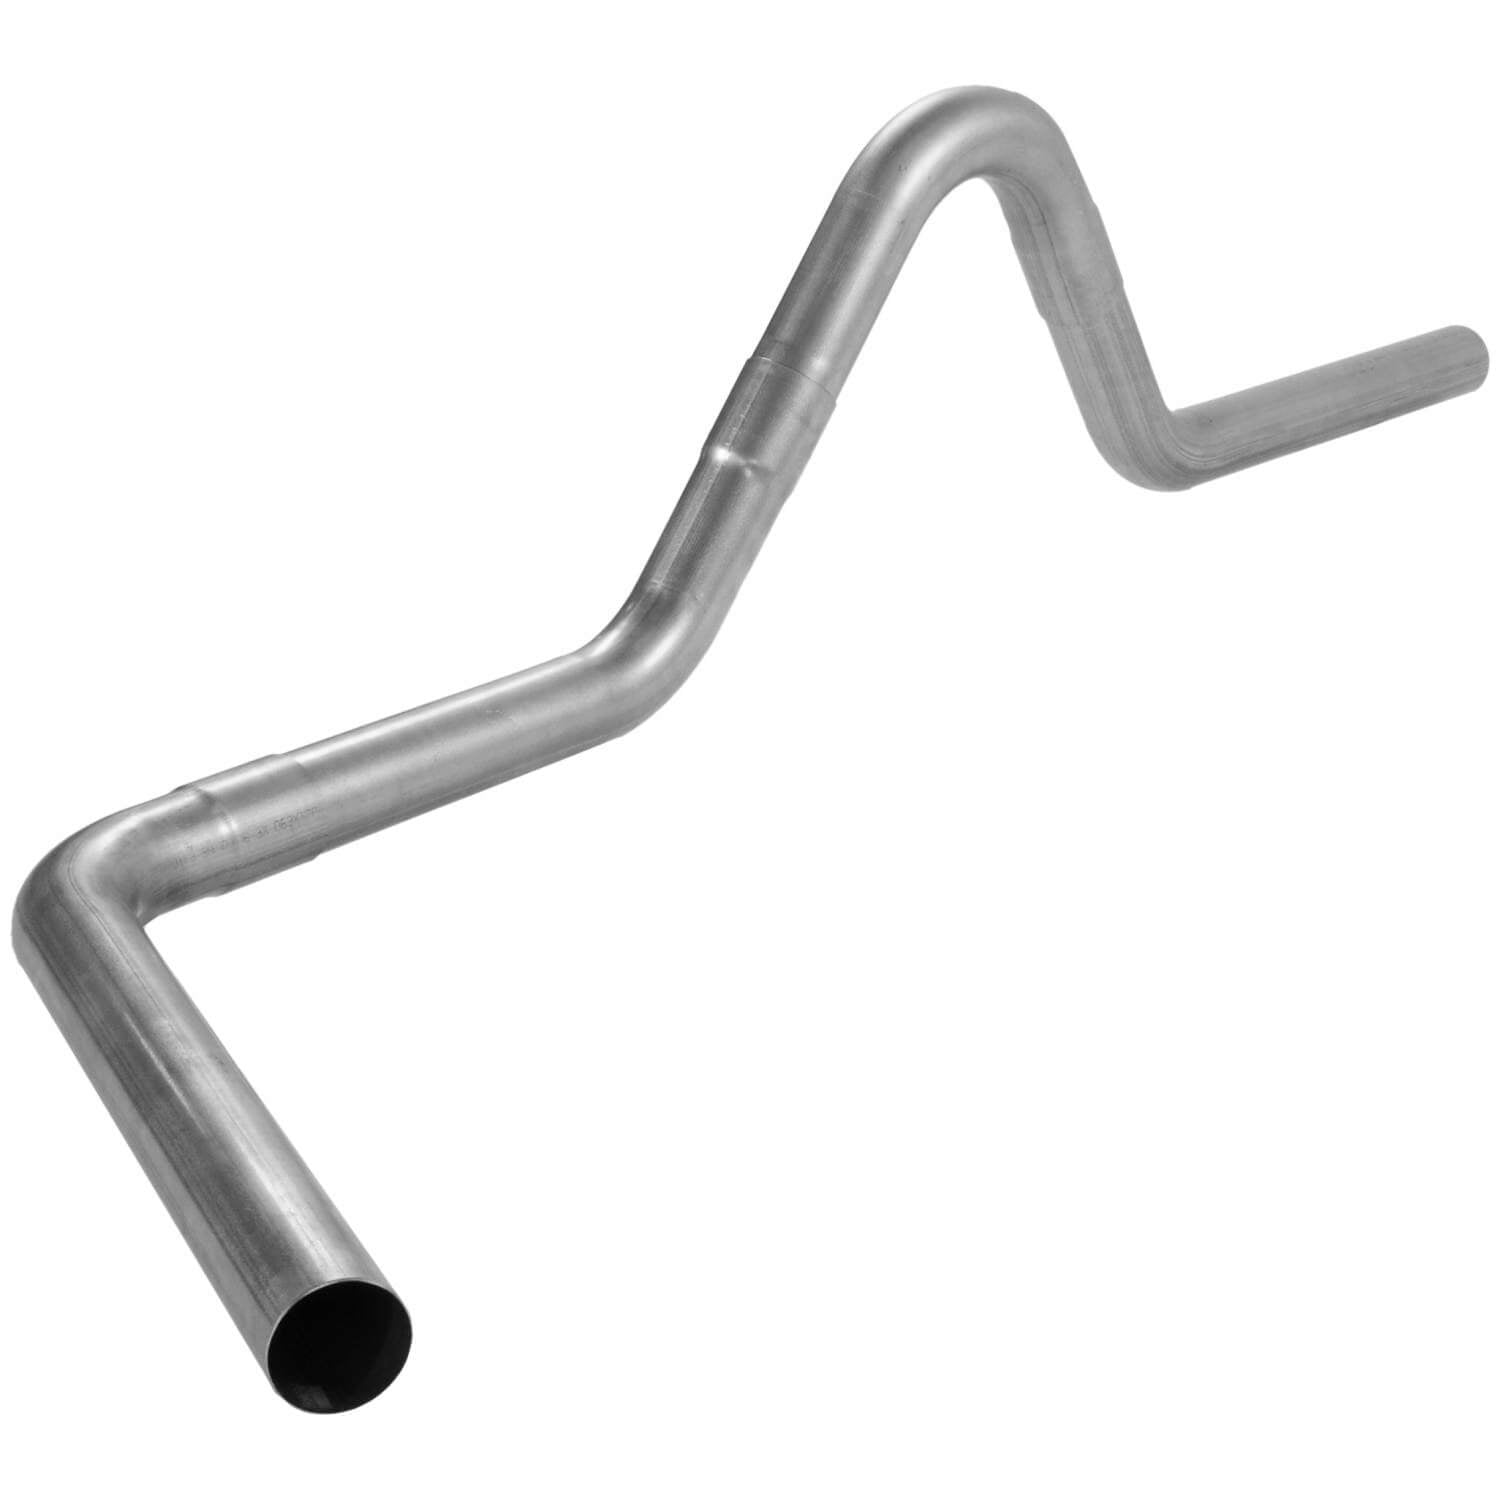 Flowmaster 15902 Single Tailpipe Kit 3.00 in. Universal 4-piece pipes only  requires welding